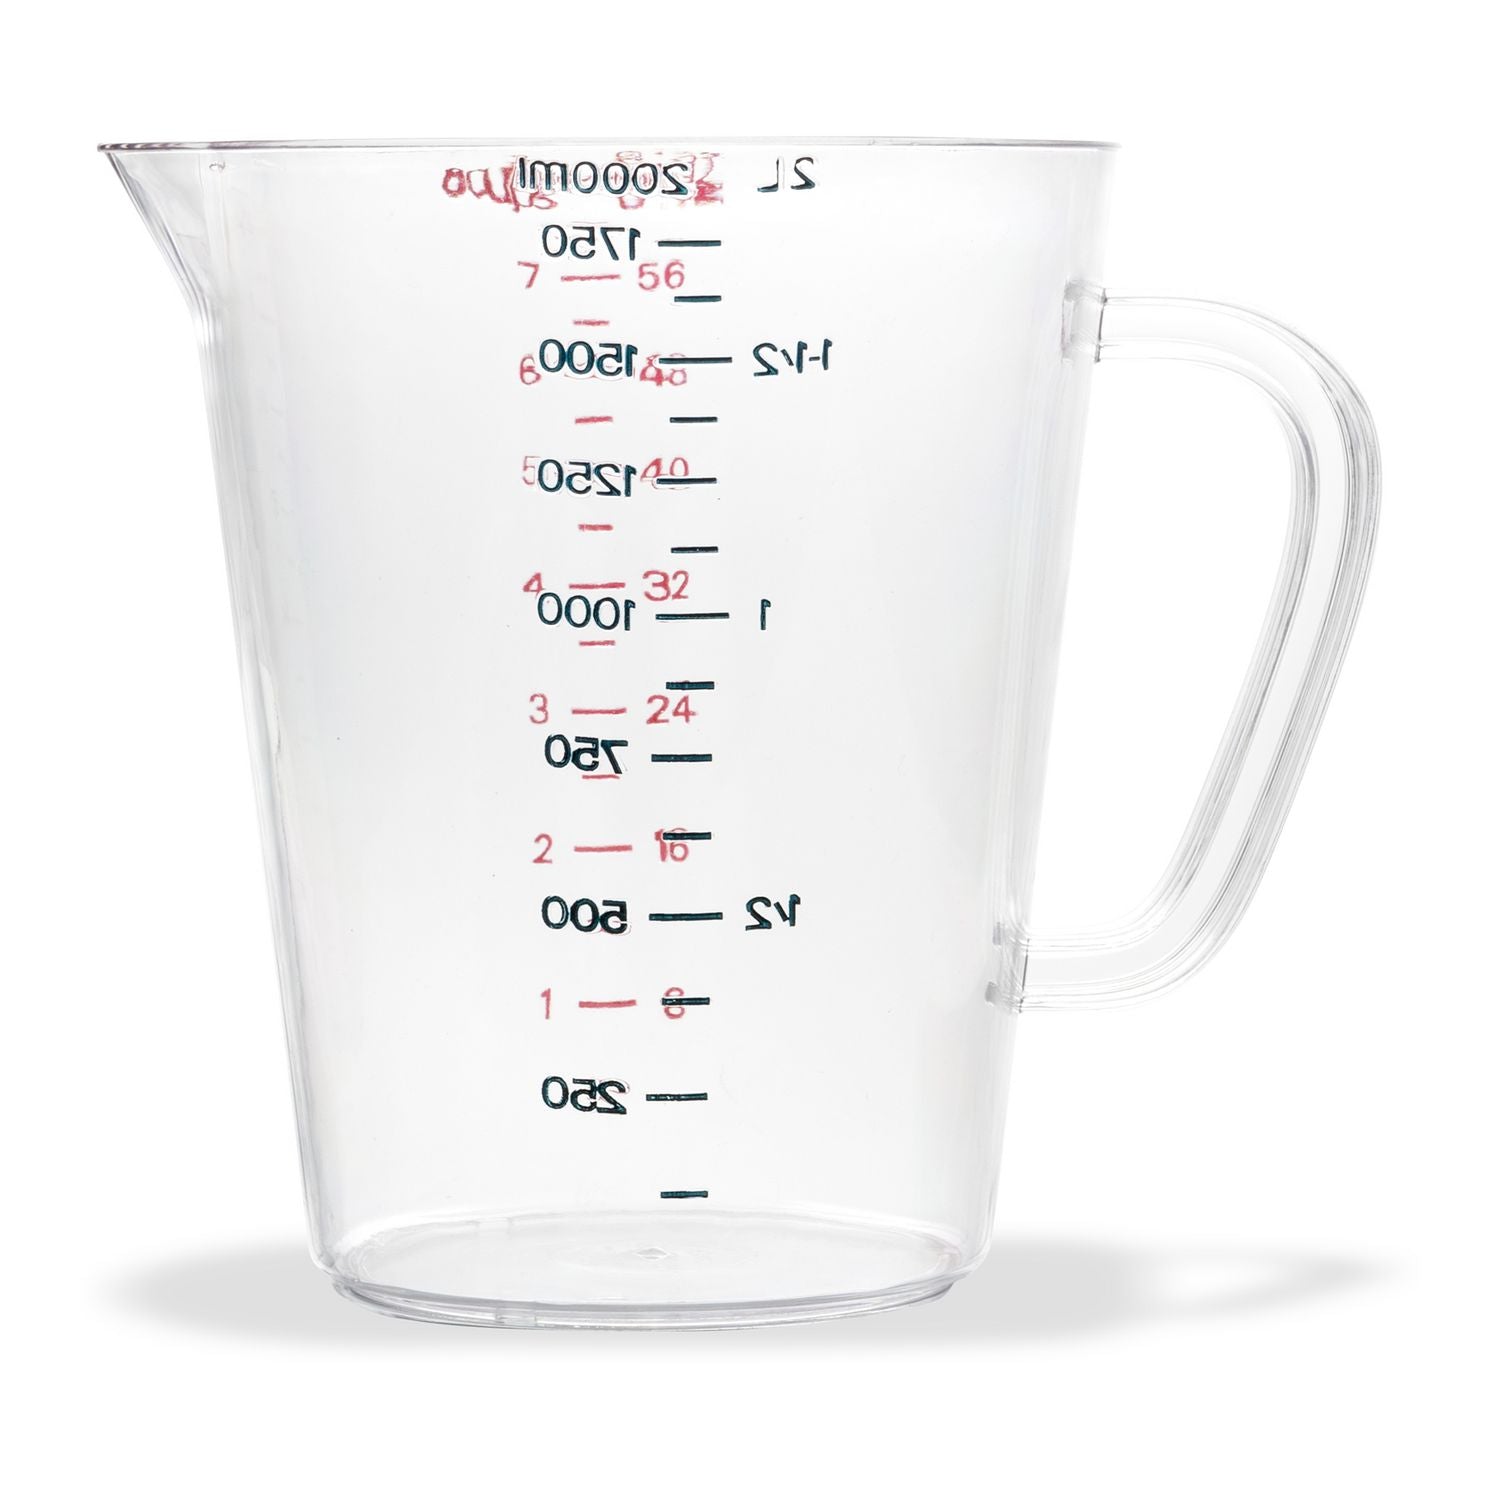 commercial-measuring-cup-05-gal-clear_cfs4314407 - 2